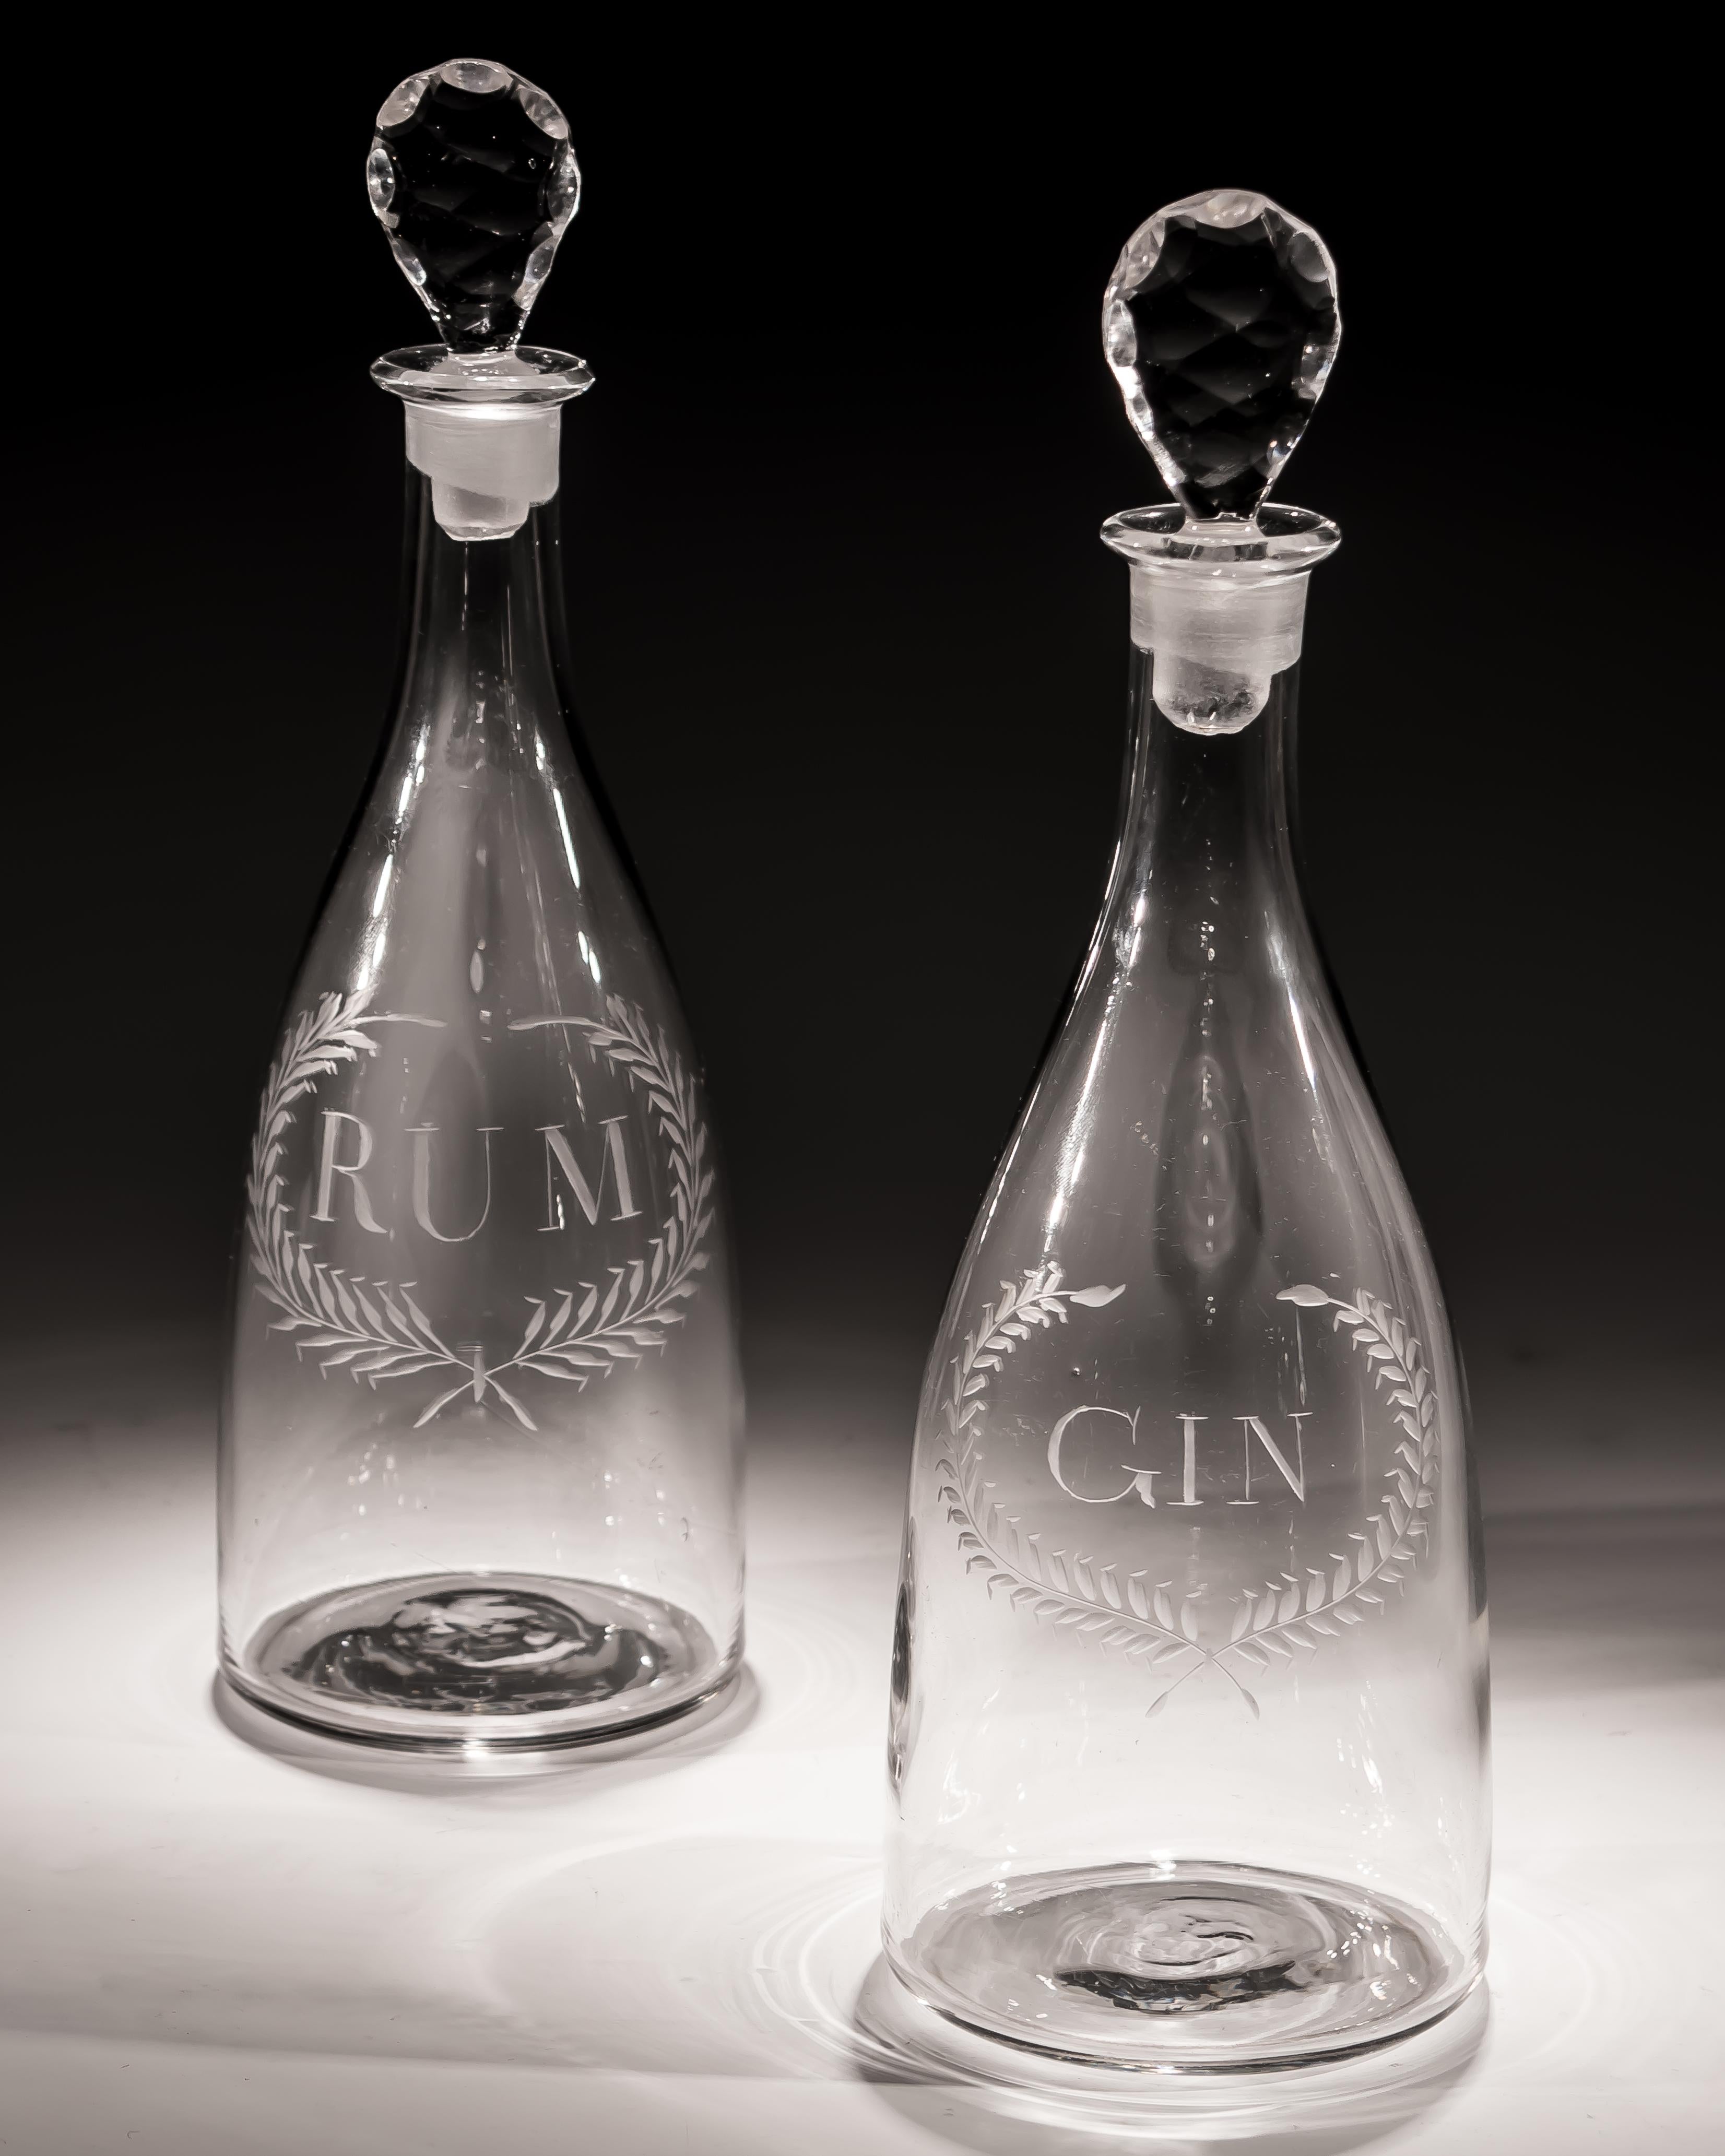 A finely engraved pair of Labelled Rum & Gin tapered Georgian decanters.